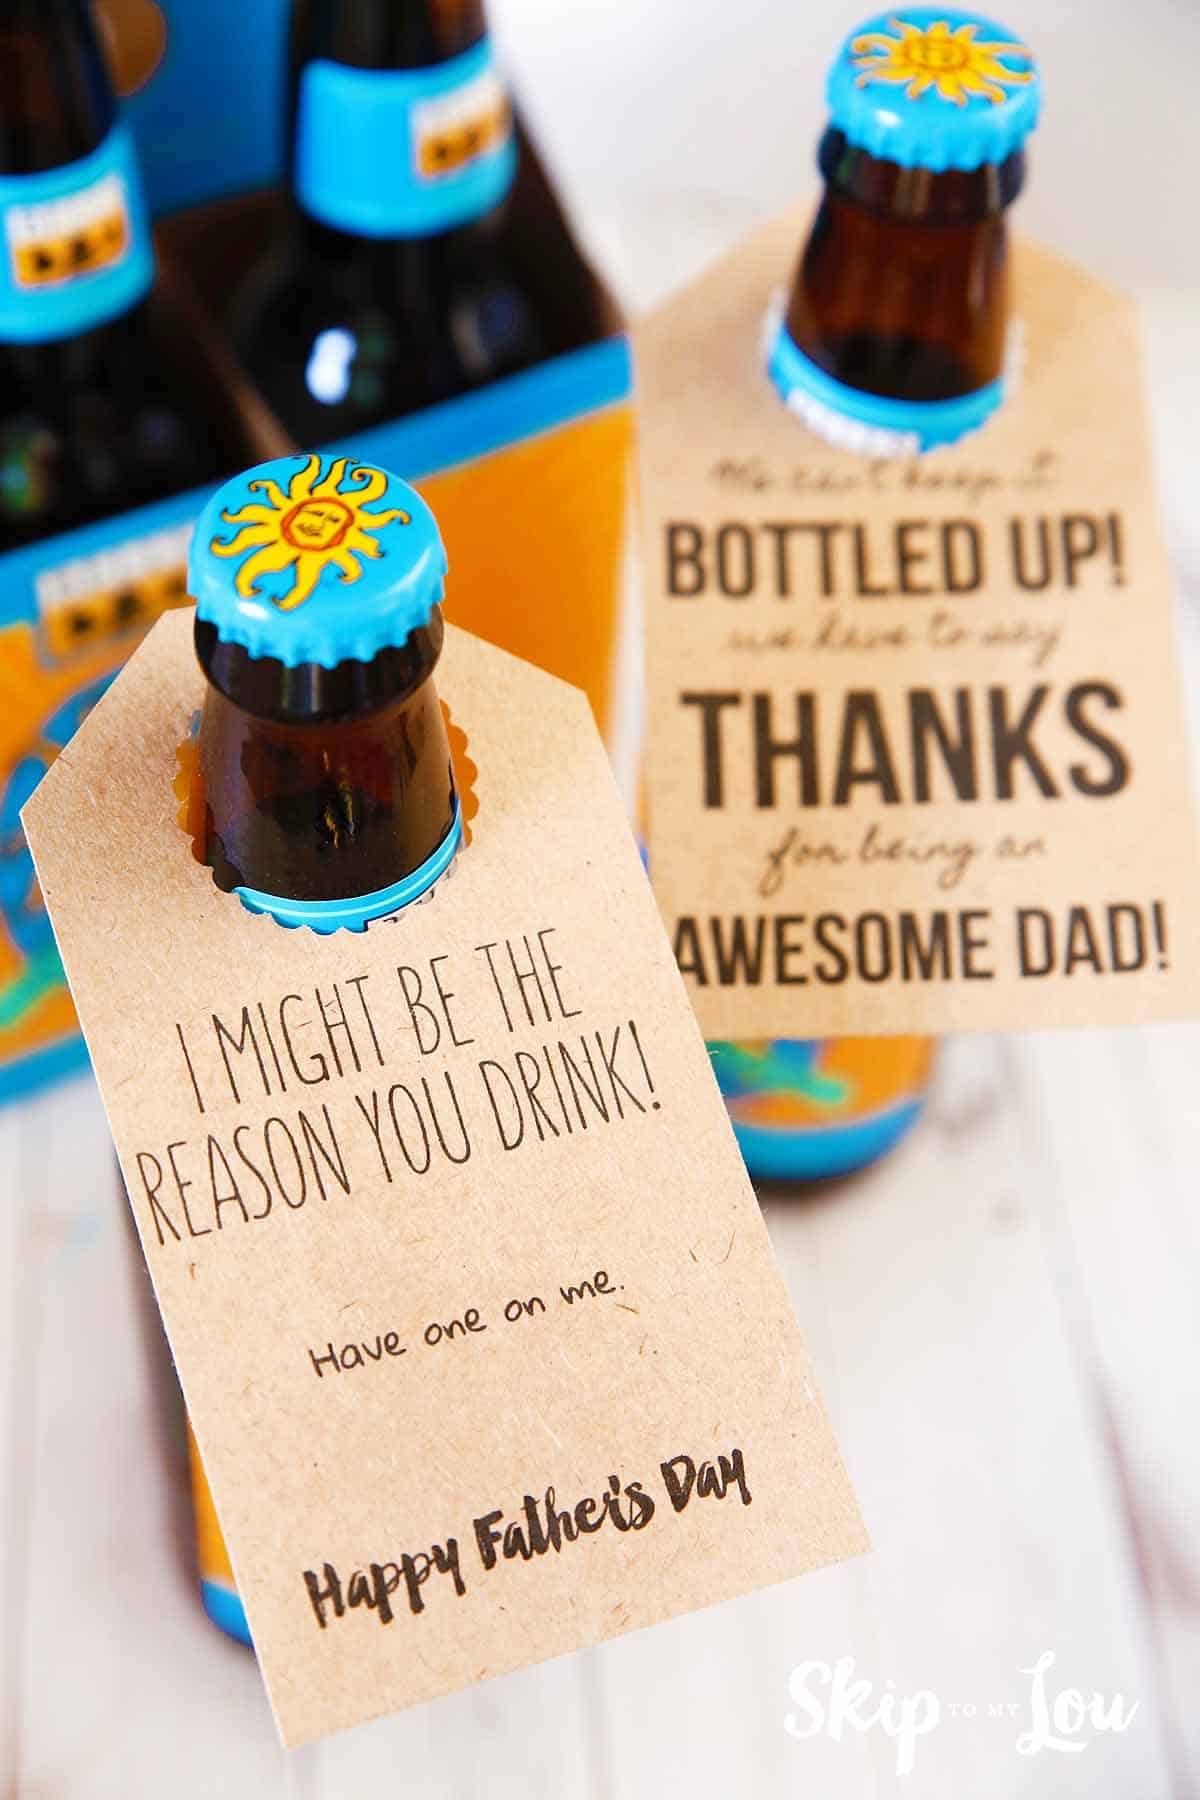 Day Gifts - Homemade Gift Ideas for Dad